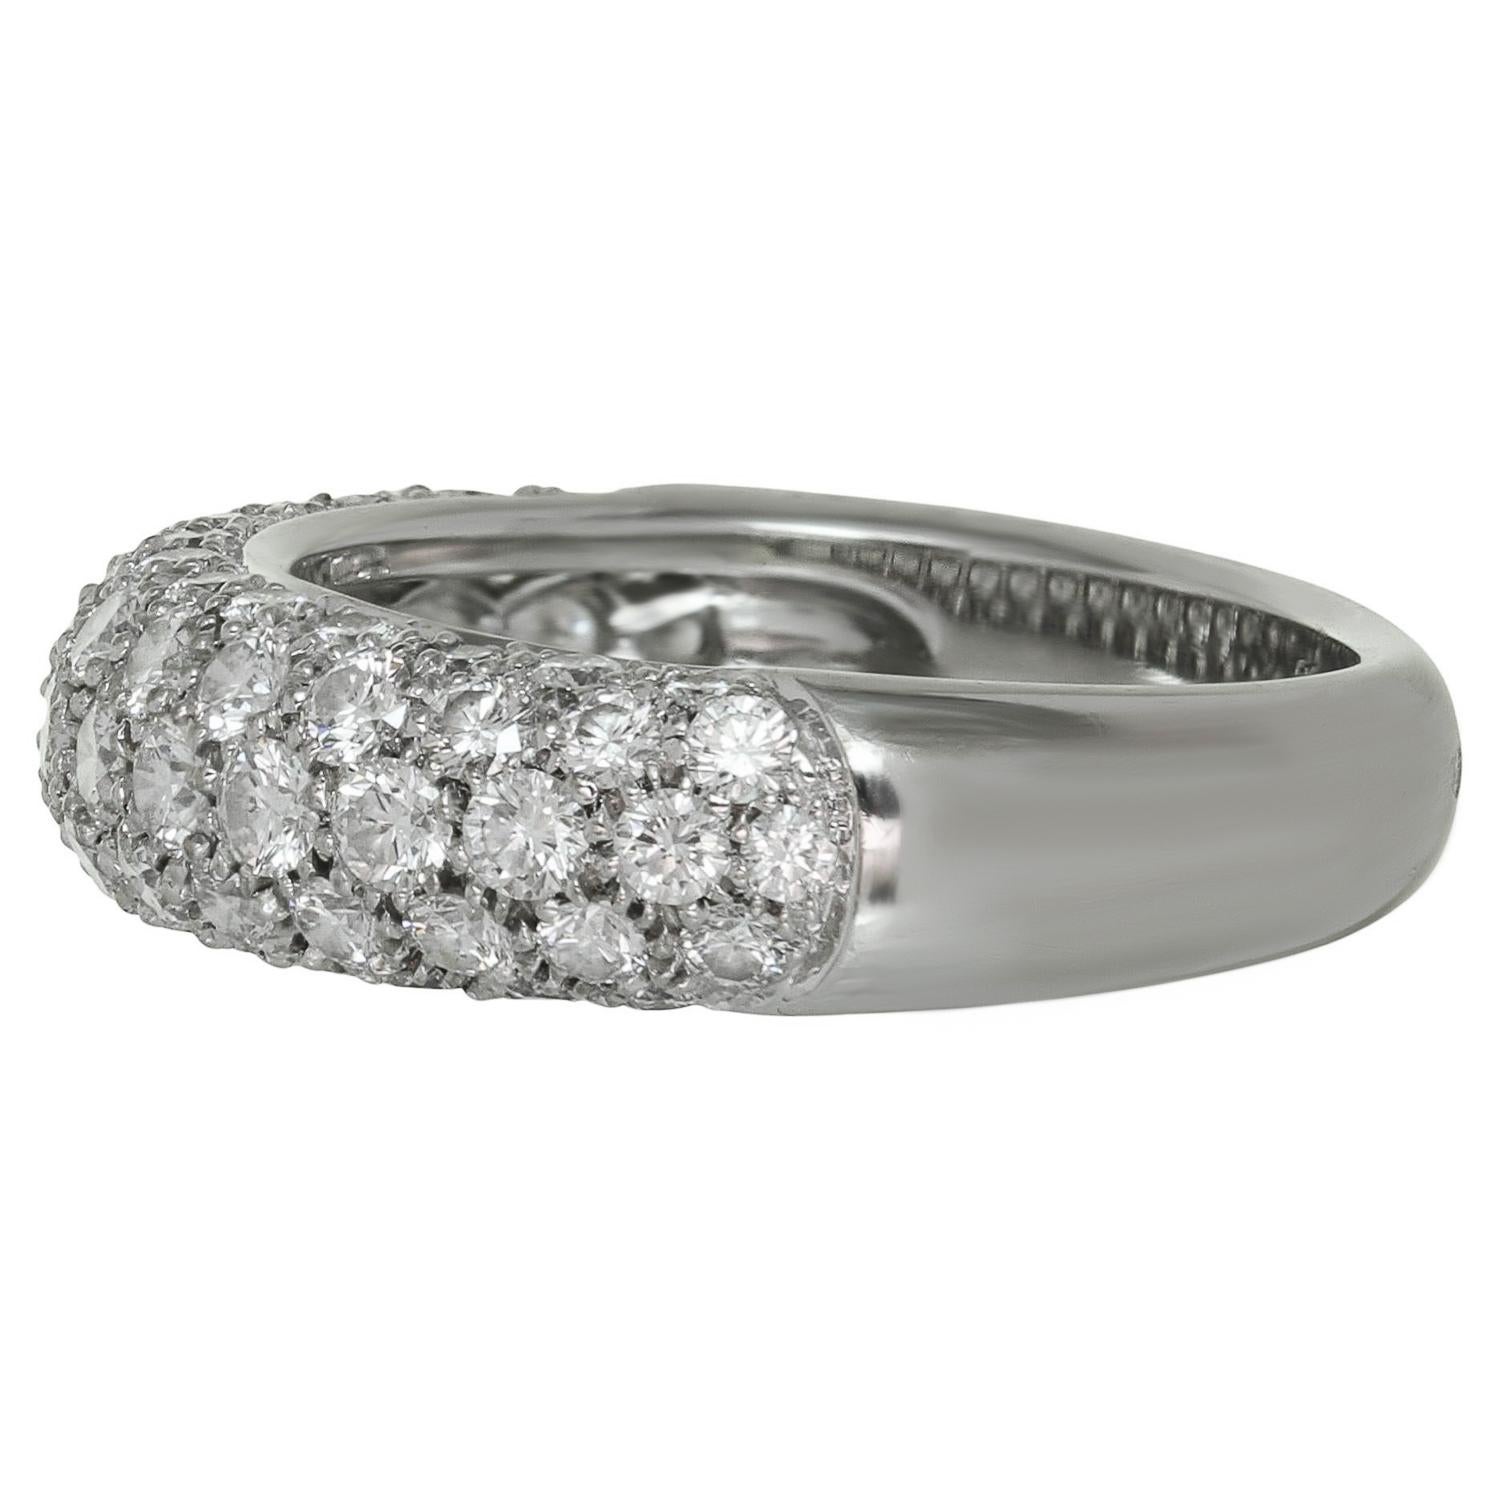 Cartier Pave Diamond 18k White Gold Band Ring 51 In Excellent Condition For Sale In New York, NY